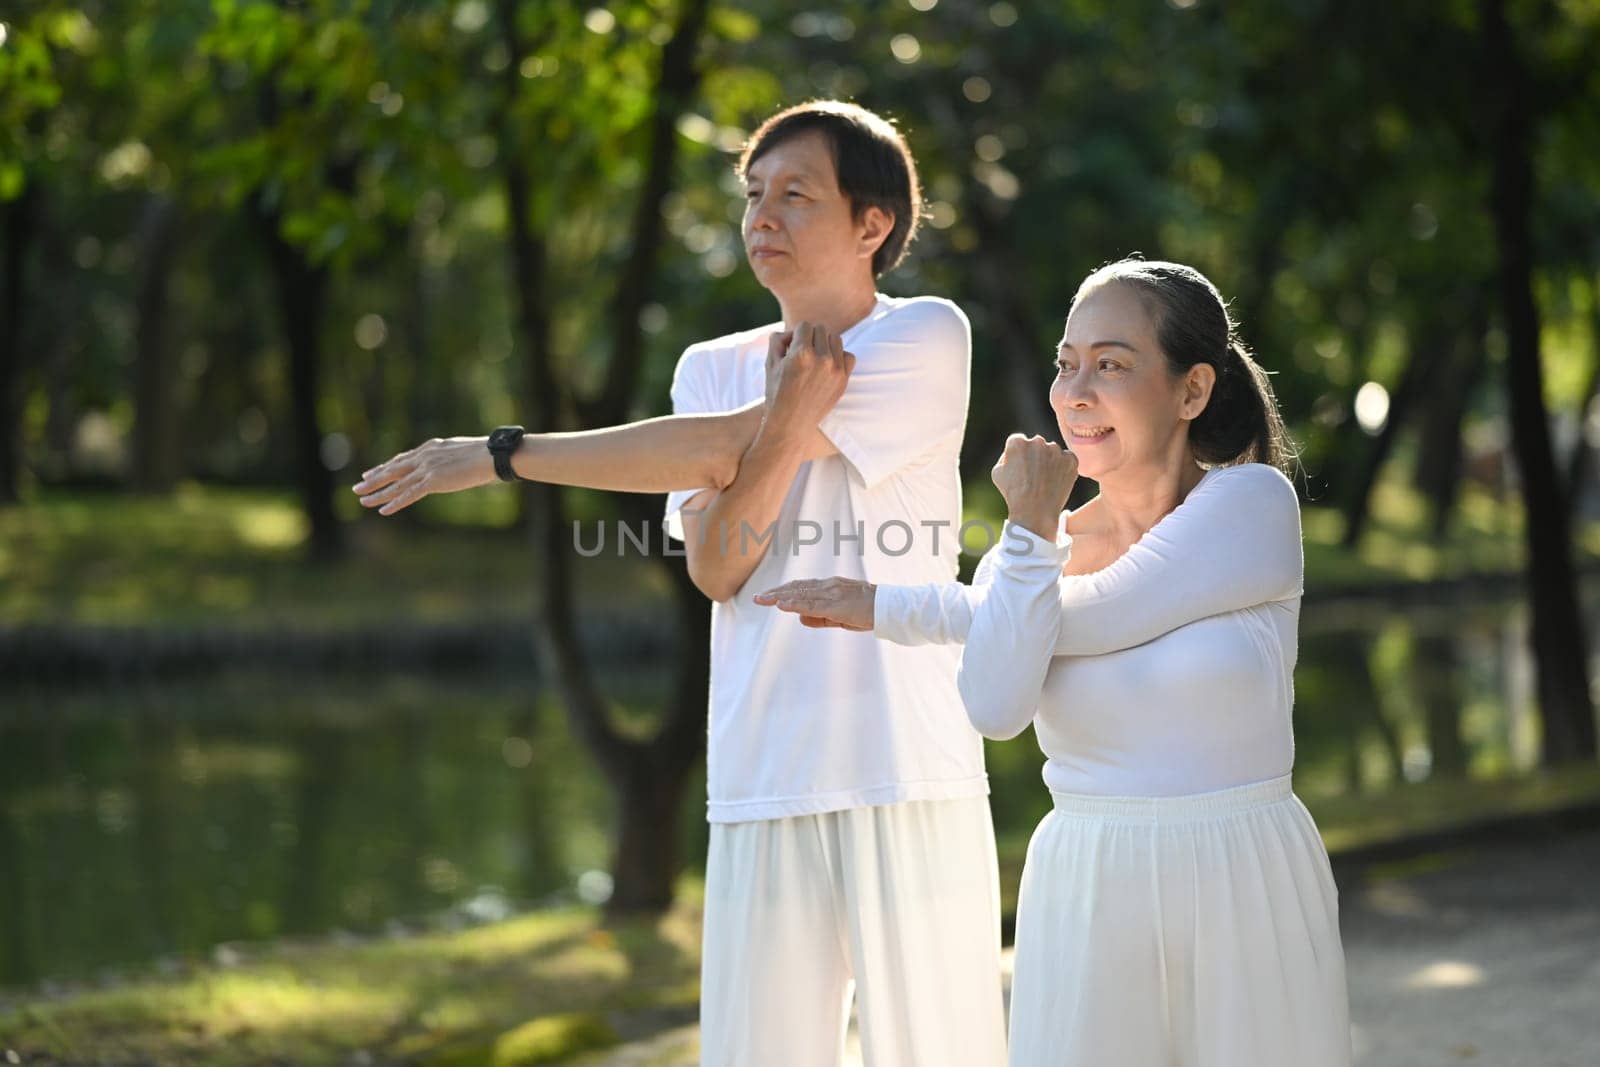 Happy retired couple in white clothes stretching in public park. Health care and wellbeing concept.